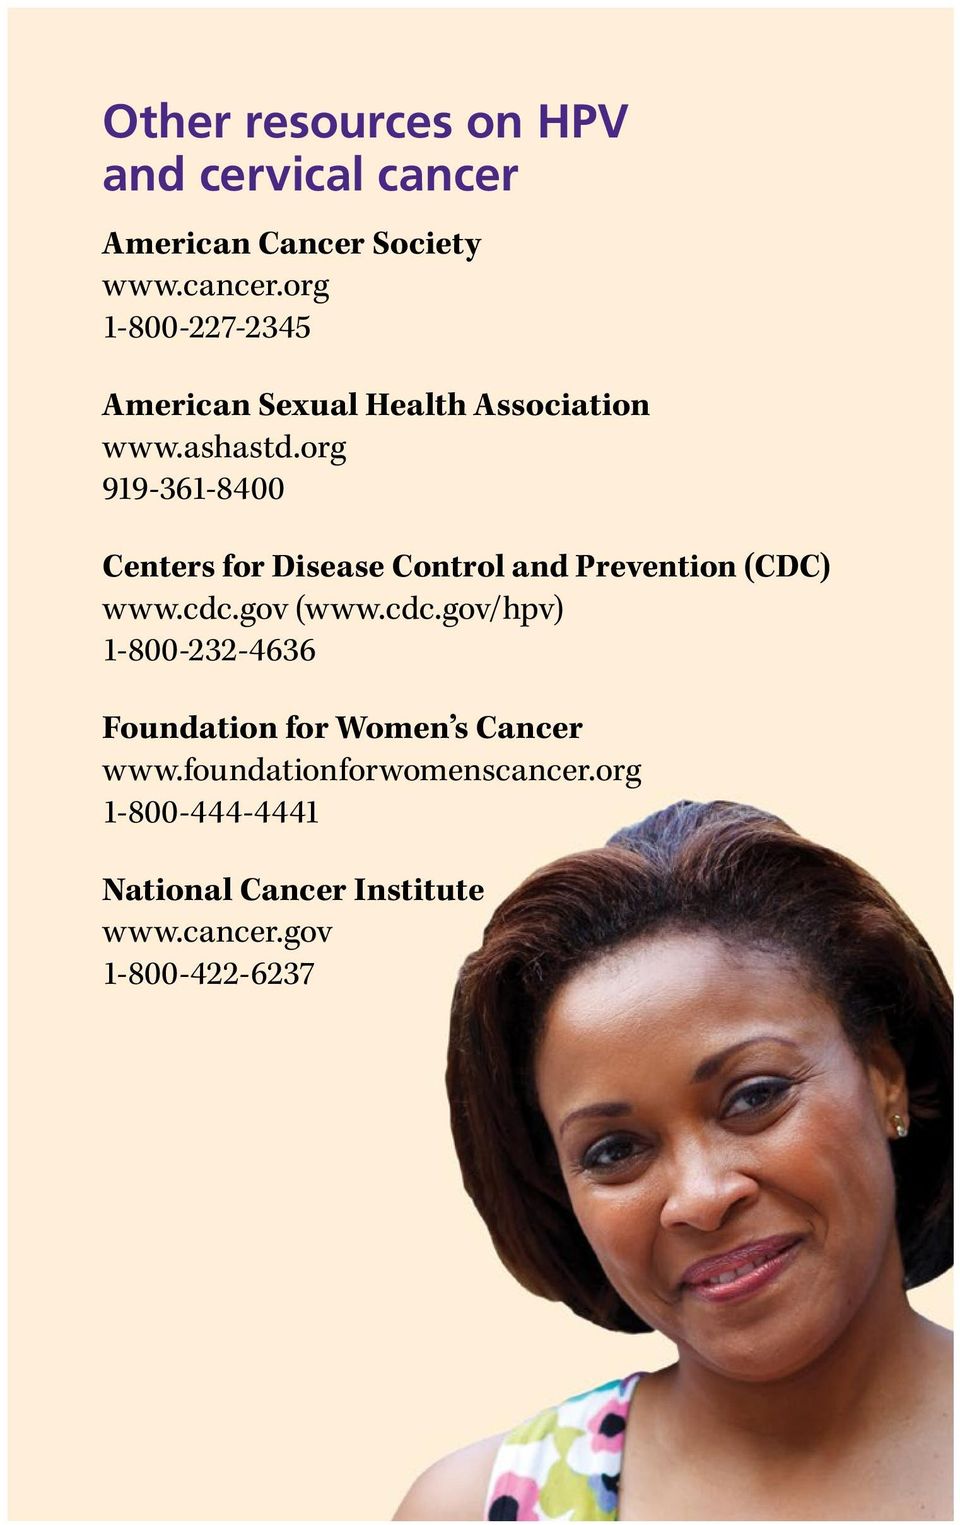 ashastd.org 919-361-8400 Centers for Disease Control and Prevention (CDC) www.cdc.